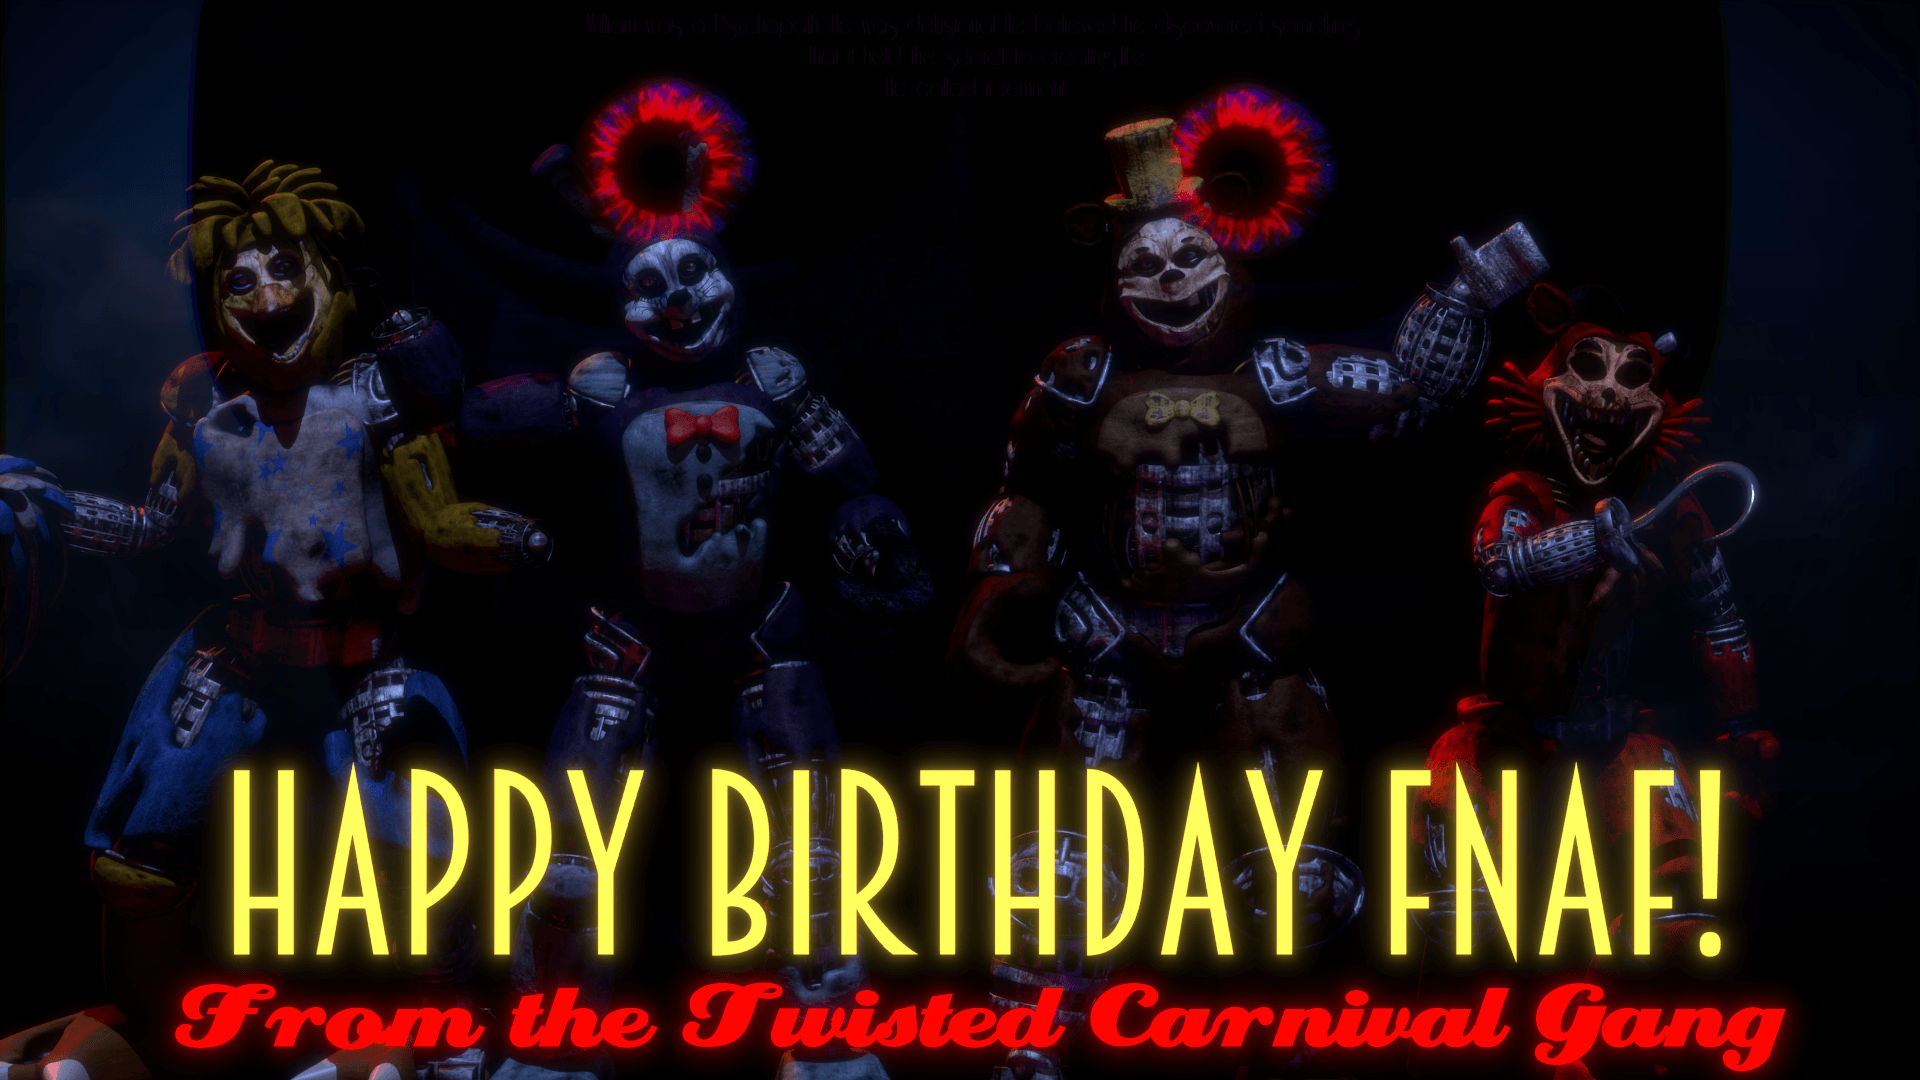 HAPPY BIRTHDAY FNAF! From the Twisted Carnival Gang